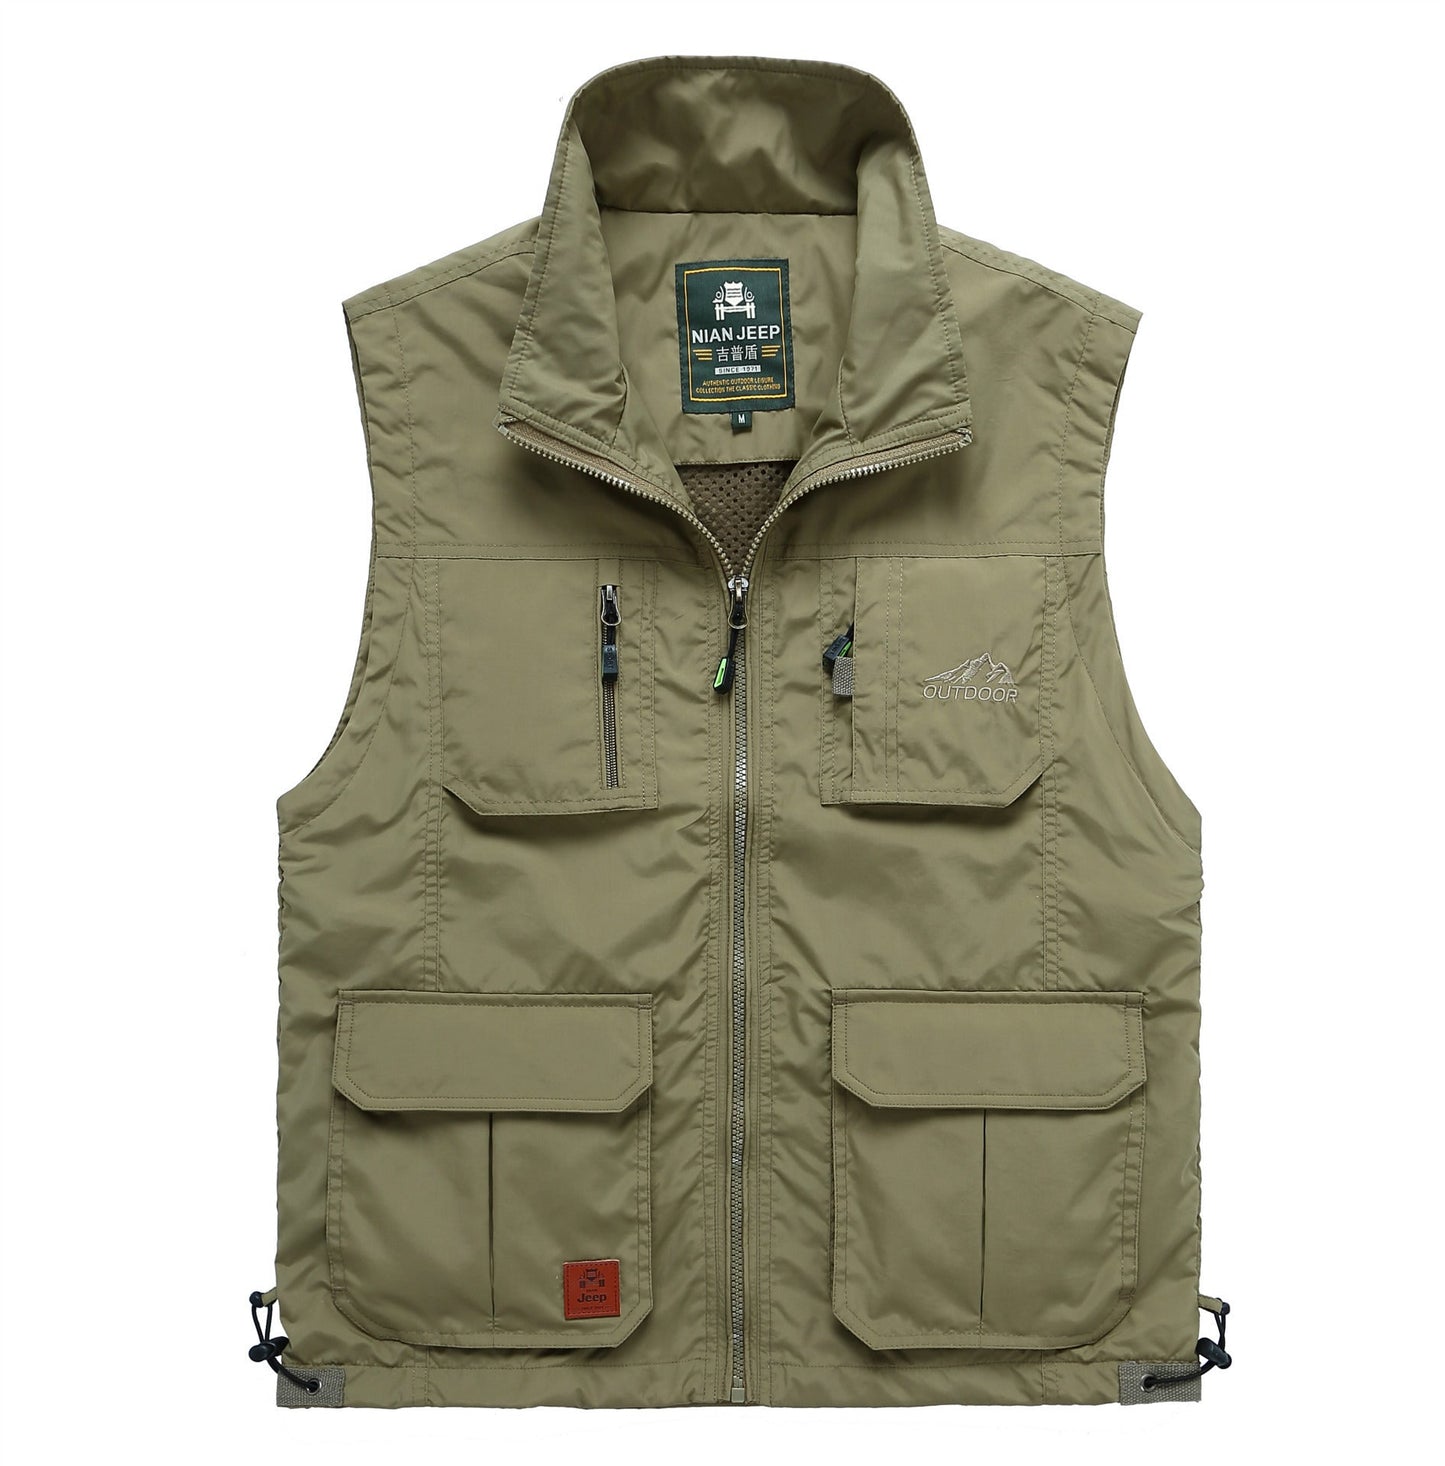 Outdoor Quick-drying Jacket Sleeveless Fishing Hunting Vest Multi-pocket Army Green 7838/7818 Down Vests-clothing-Biu Blaster-d-Uenel